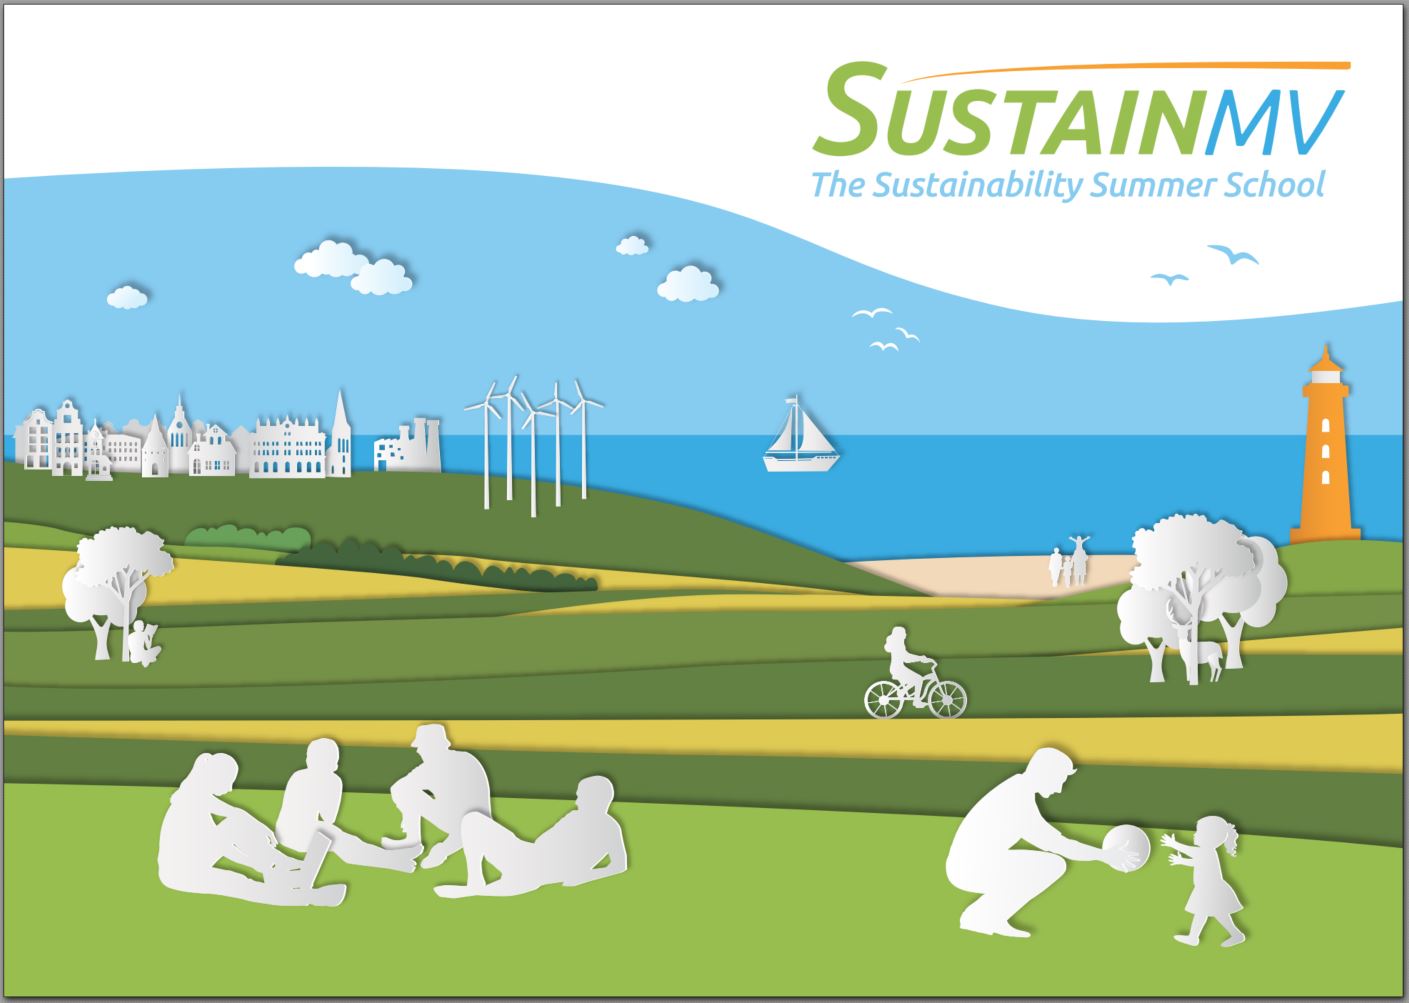 Announcing the 4th edition of SustainMV, the summer school dedicated to sustainability